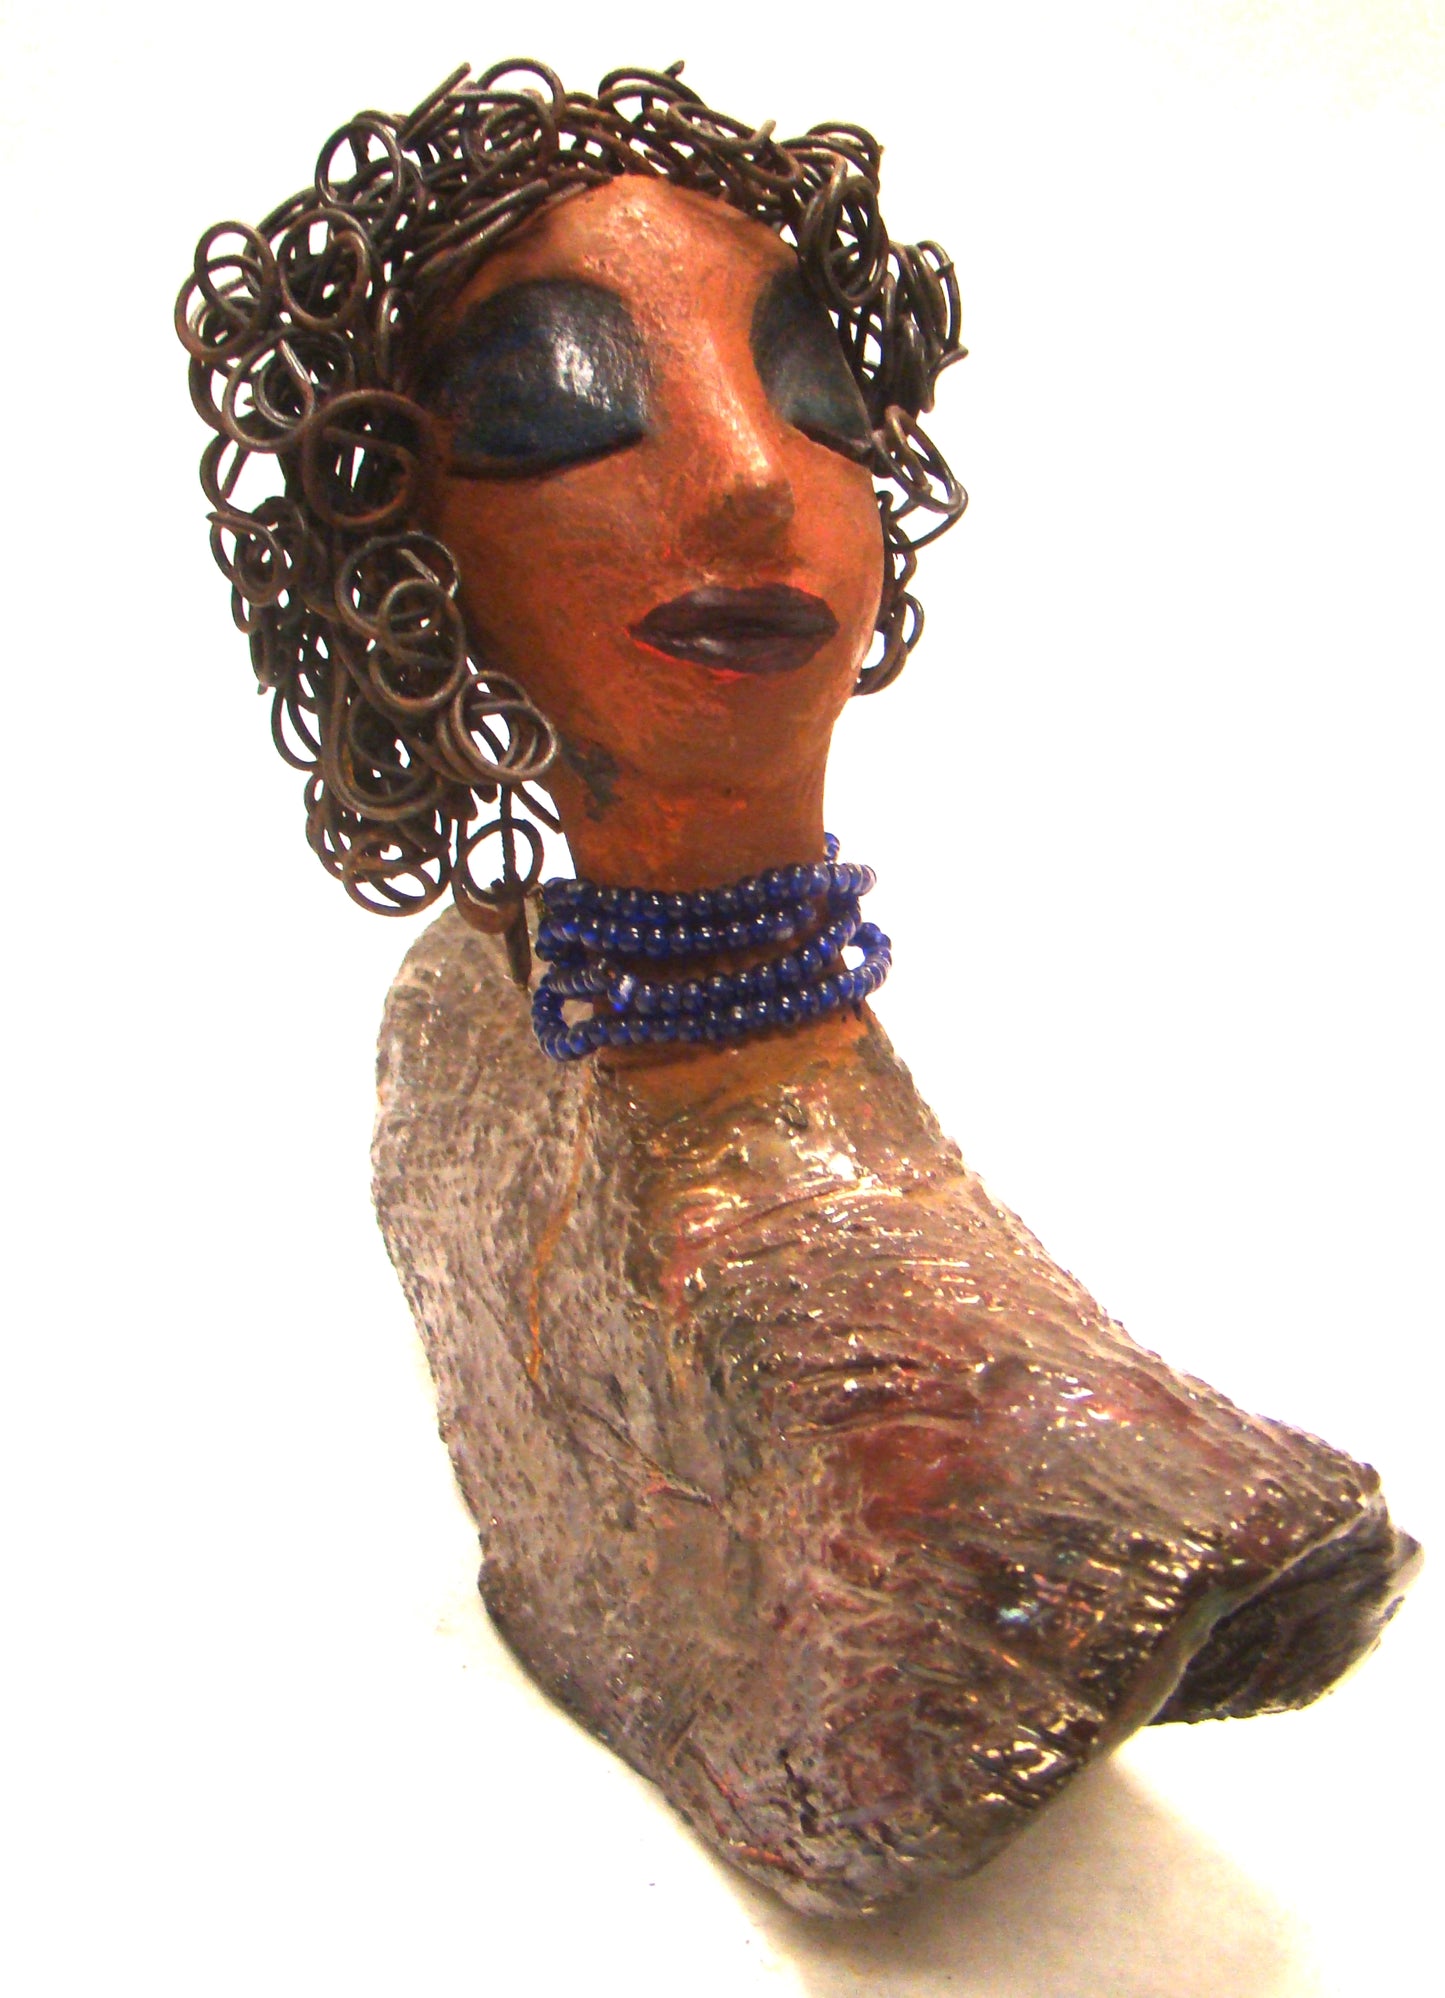 Helen stands 8" x  8" x 3" and weighs 2.06 lbs. She has a lovely honey brown complexion. Helen has a metallic copper glaze on her textured robe. Her blue eye shadow matches the blue strand of beads around her neck. Helen has over 20 feet of curly wire hair. Helen is somewhat angelic! Give Helen a prominent place in your home!